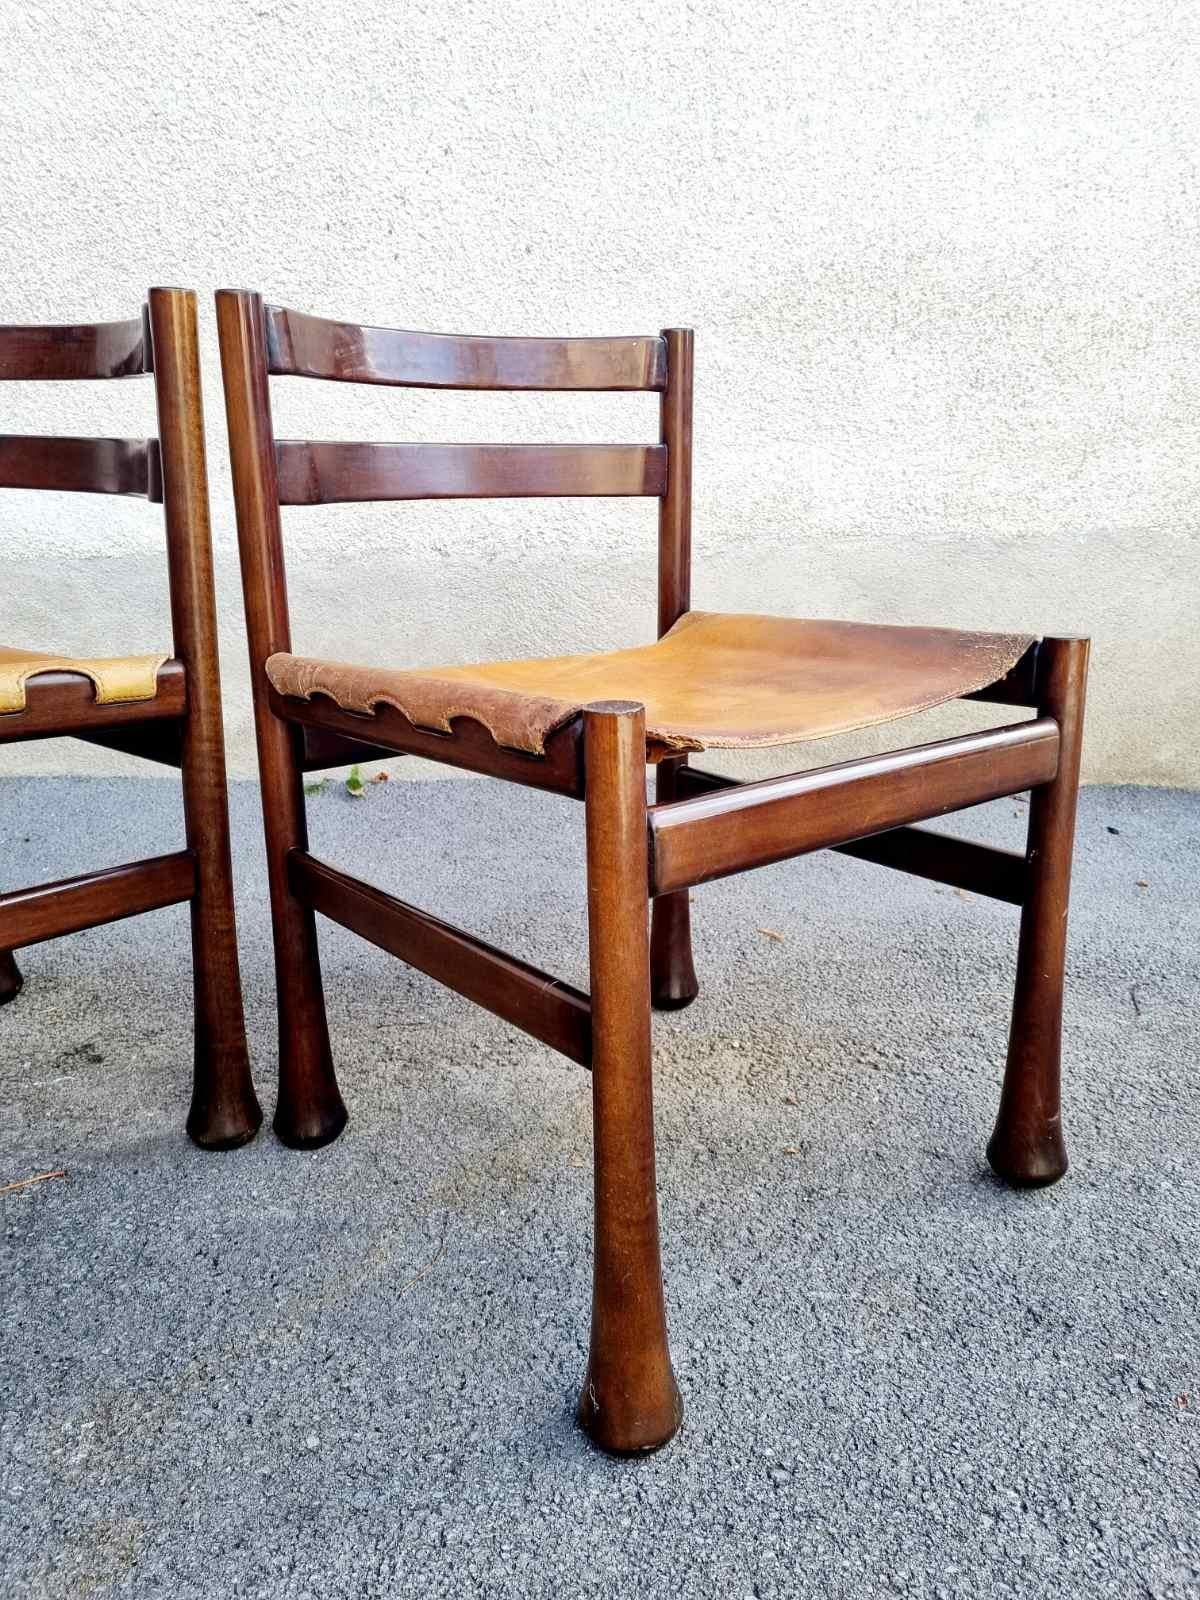 Italian Modern Rosewood and Leather Dining Chairs, Design Luciano Frigerio, 70s For Sale 5